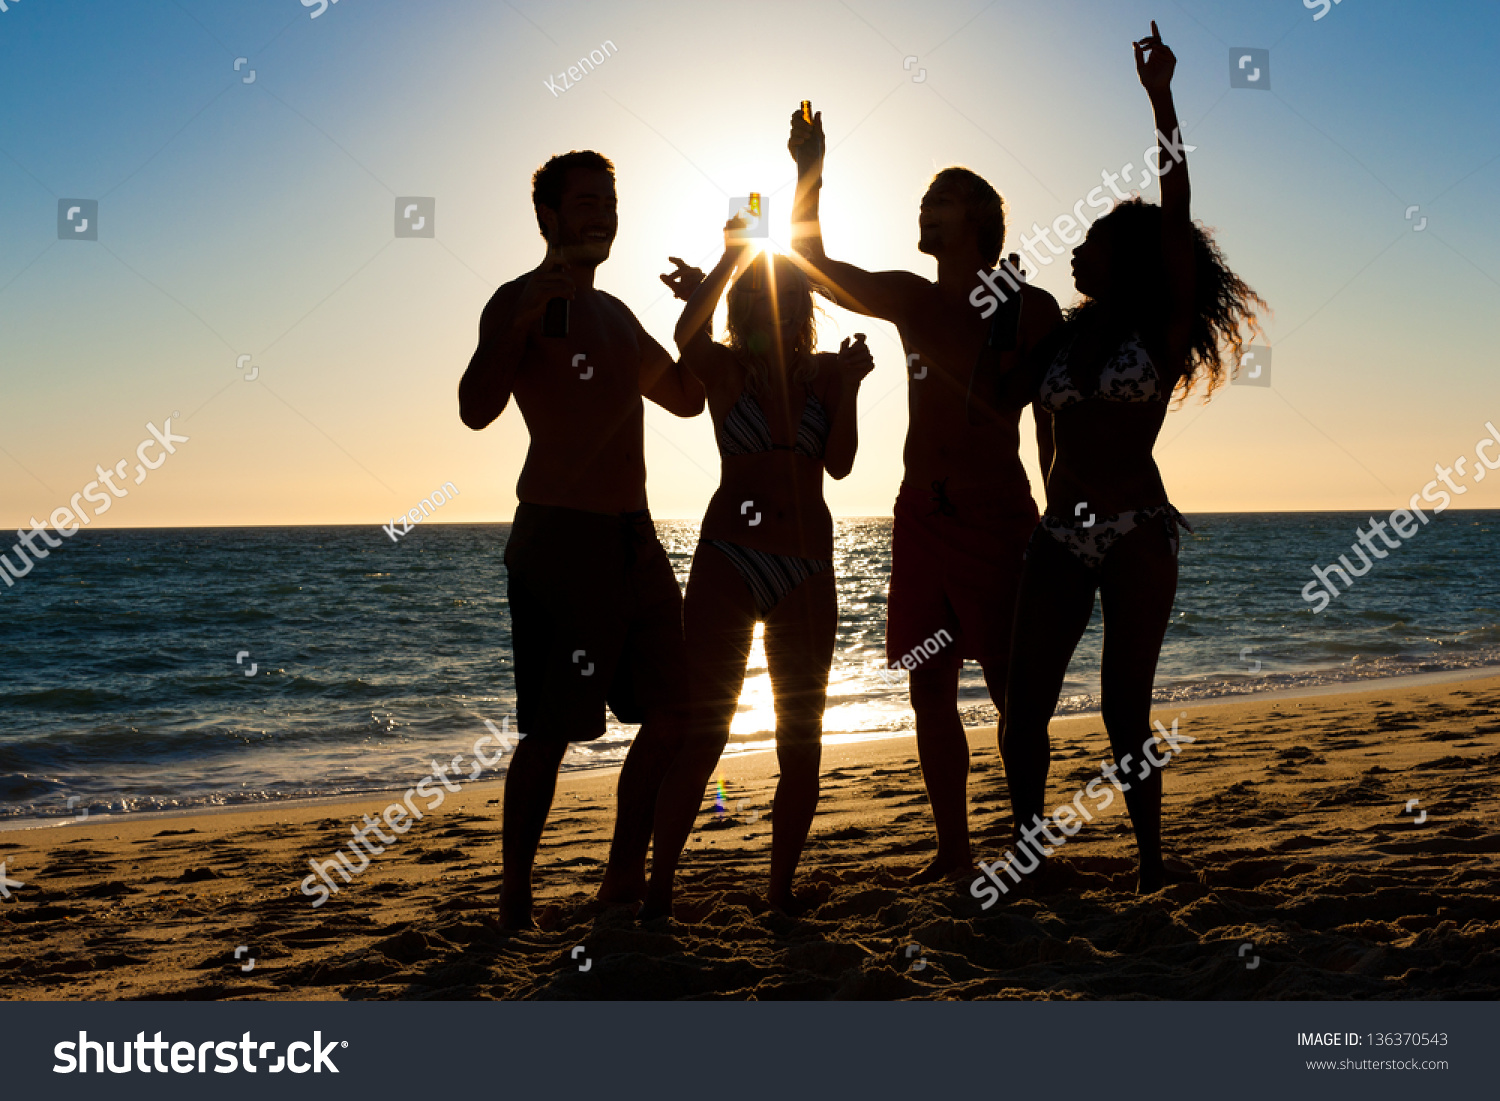 People Two Couples On Beach Having Stock Photo 136370543 - Shutterstock